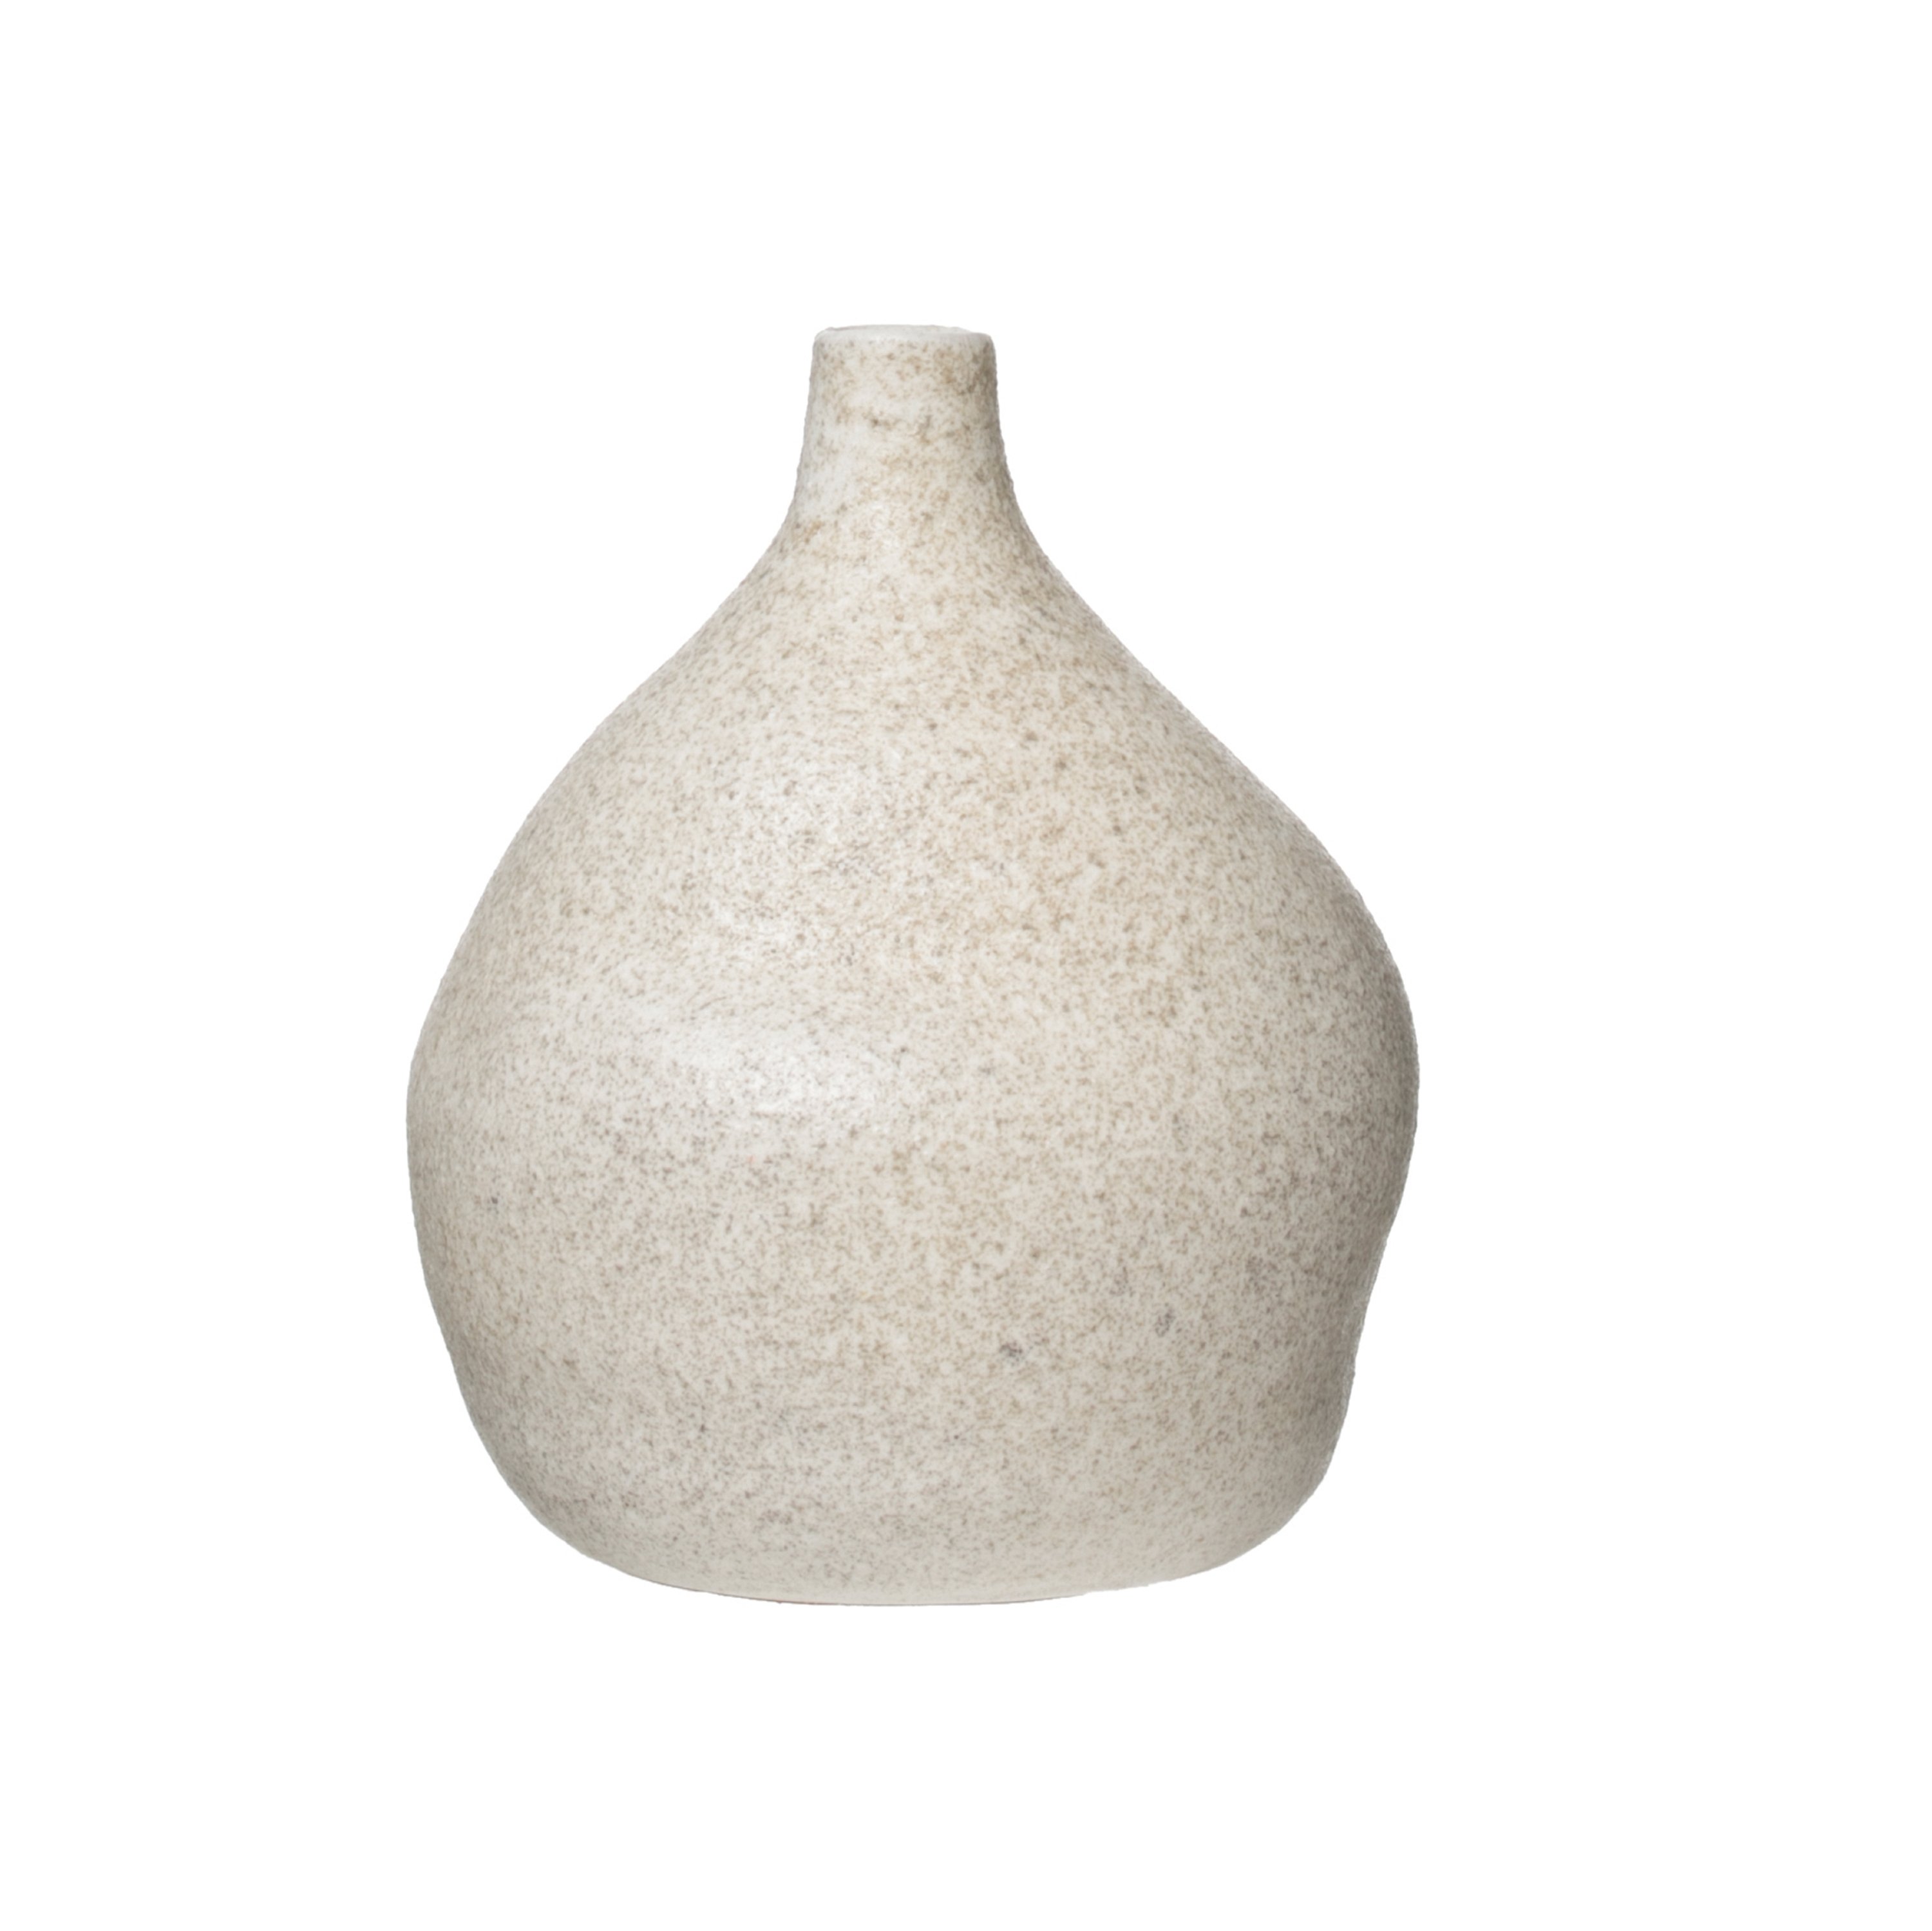 Small Textured Terracotta Vase with Narrow Top & Distressed Finish - Image 0